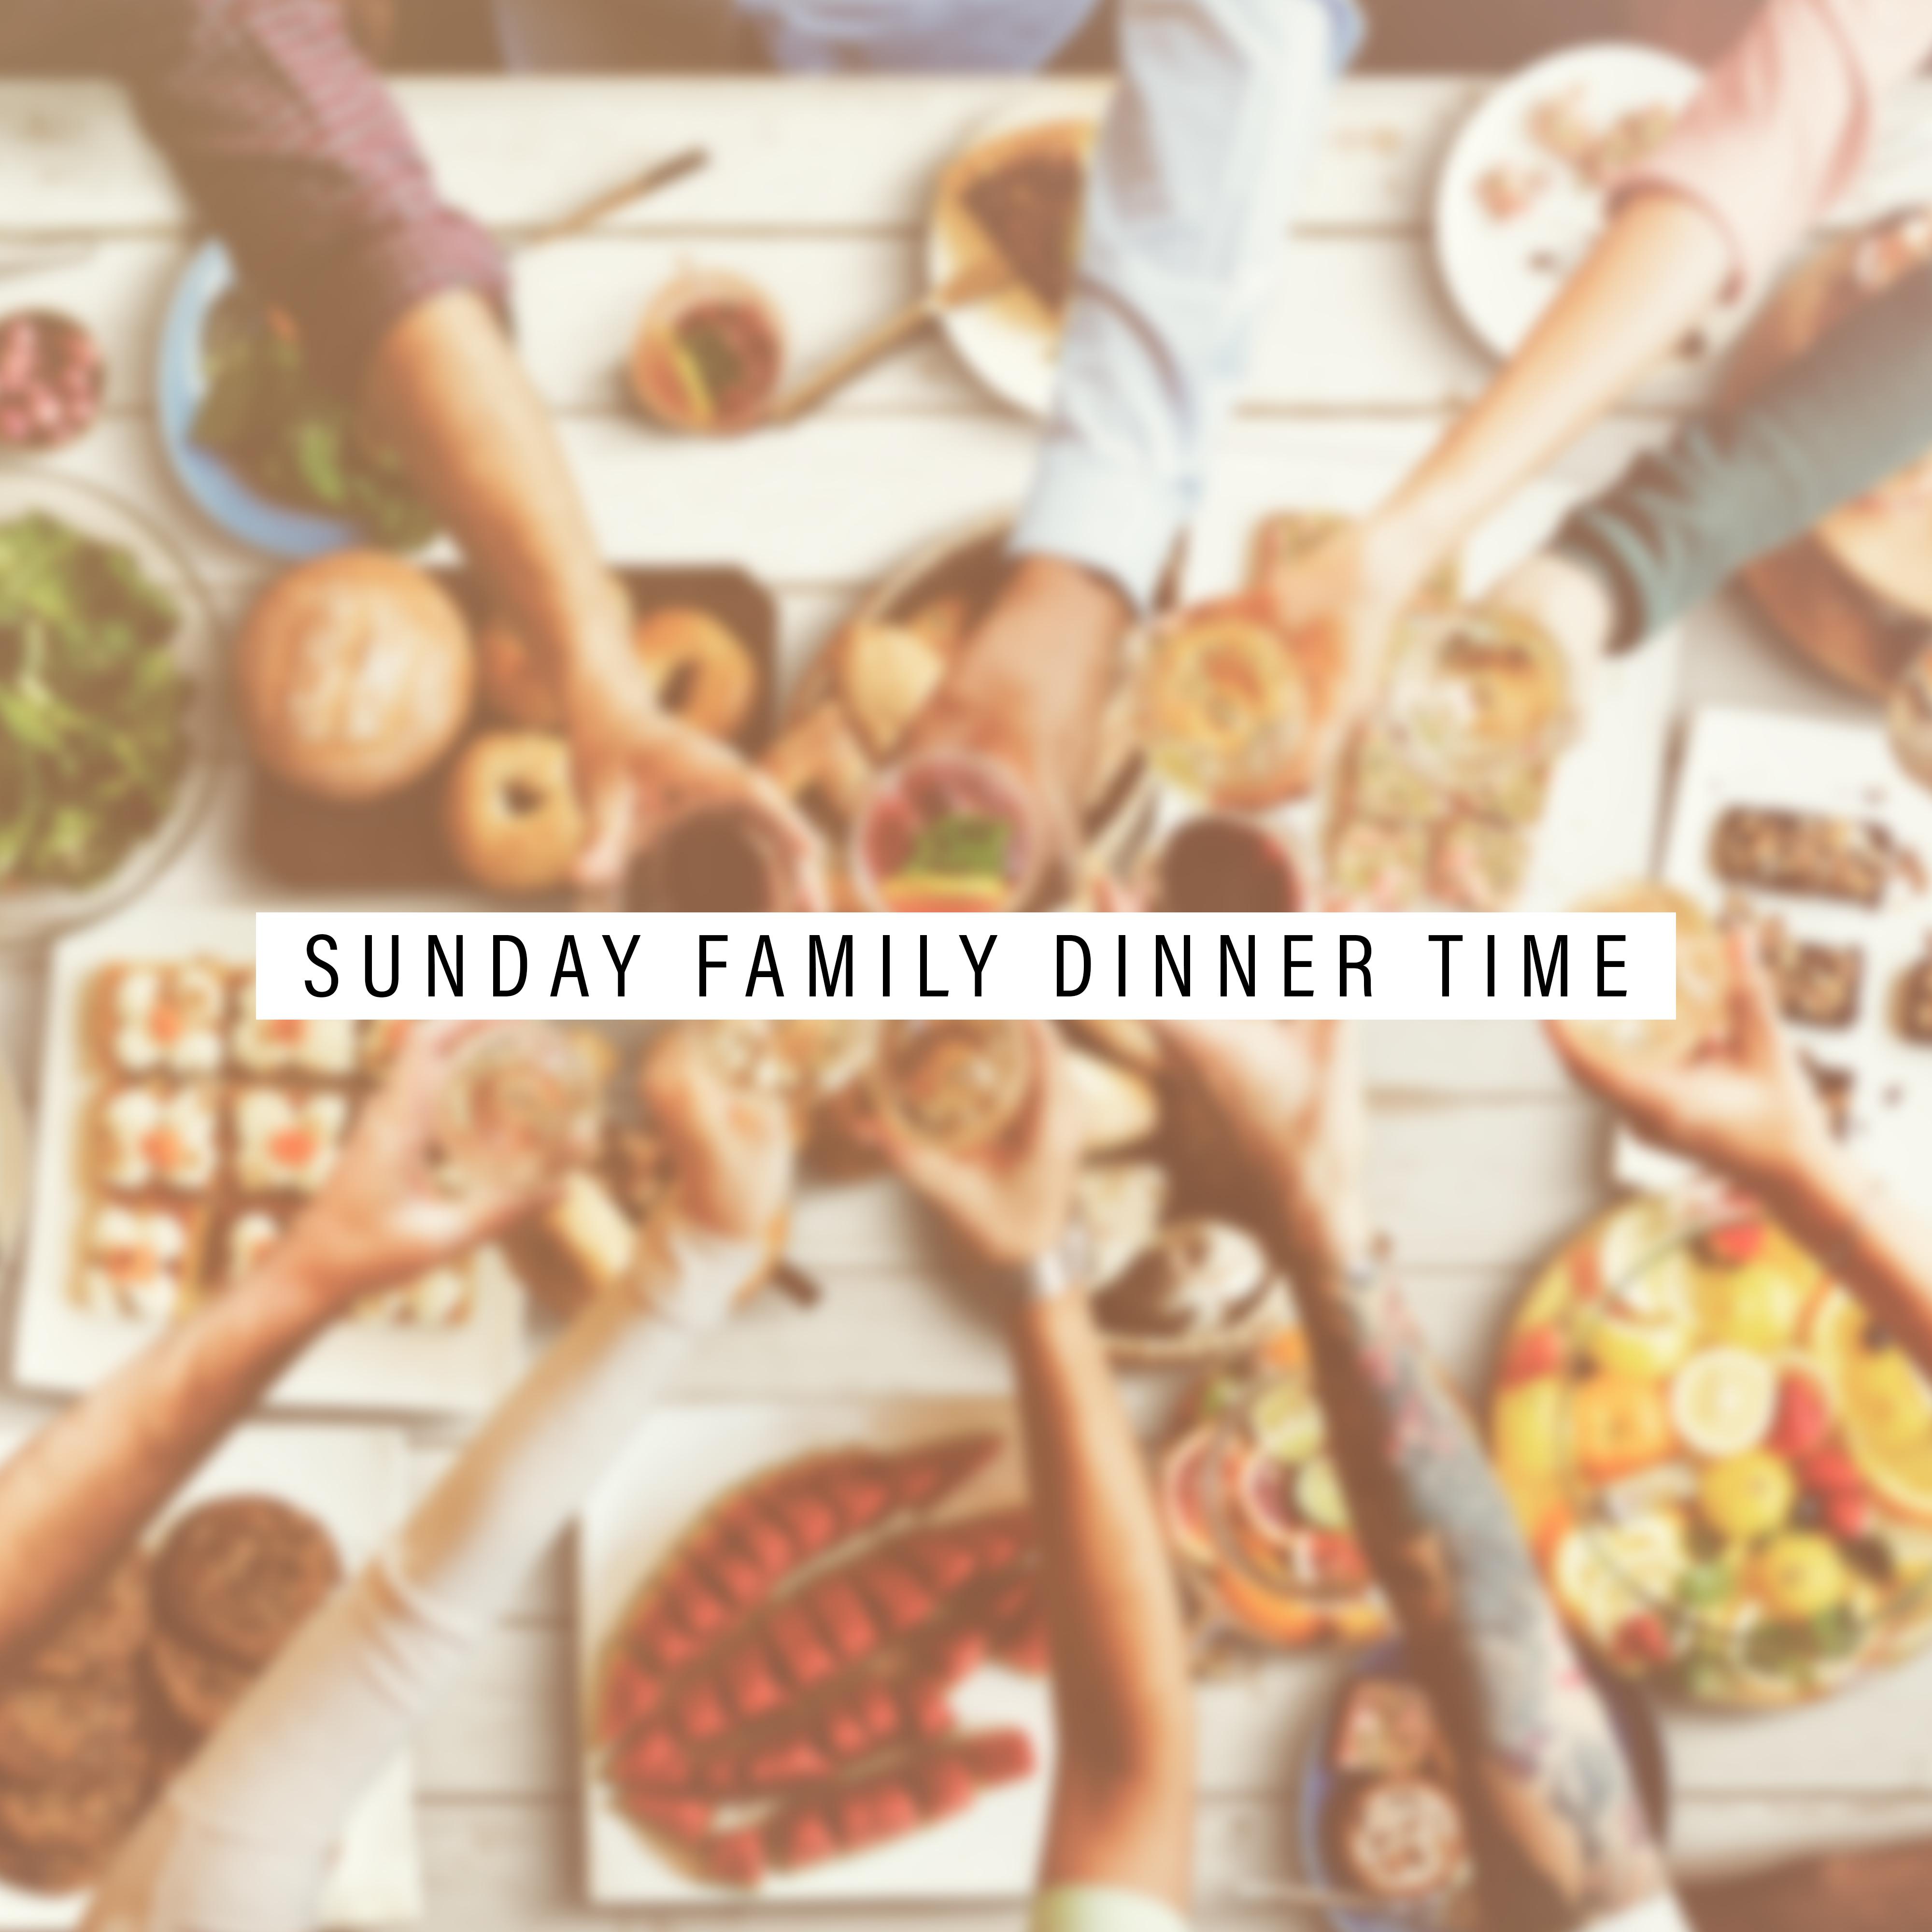 Sunday Family Dinner Time: 2019 Instrumental Smooth Jazz Background Music for Restaurant or Home Meal Time